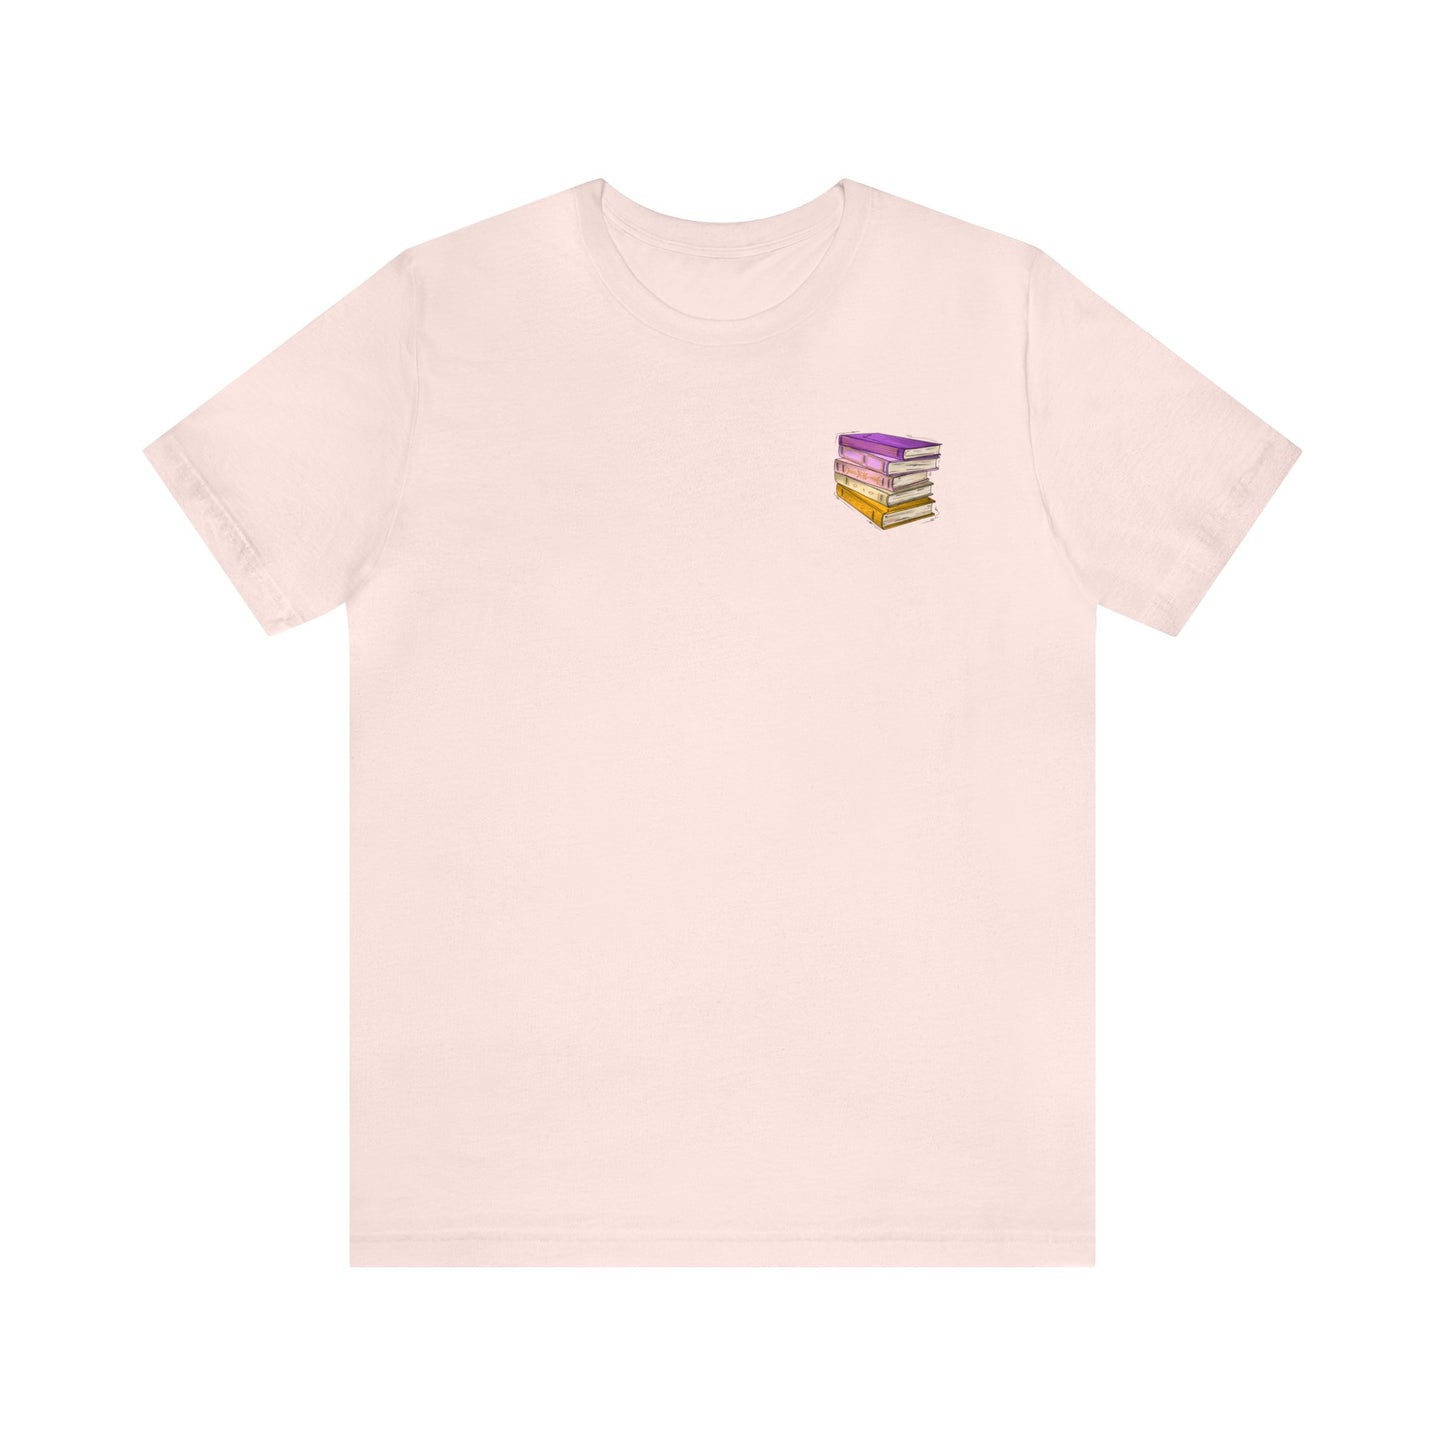 Trixic Pride Flag Old Books - Unisex T-Shirt